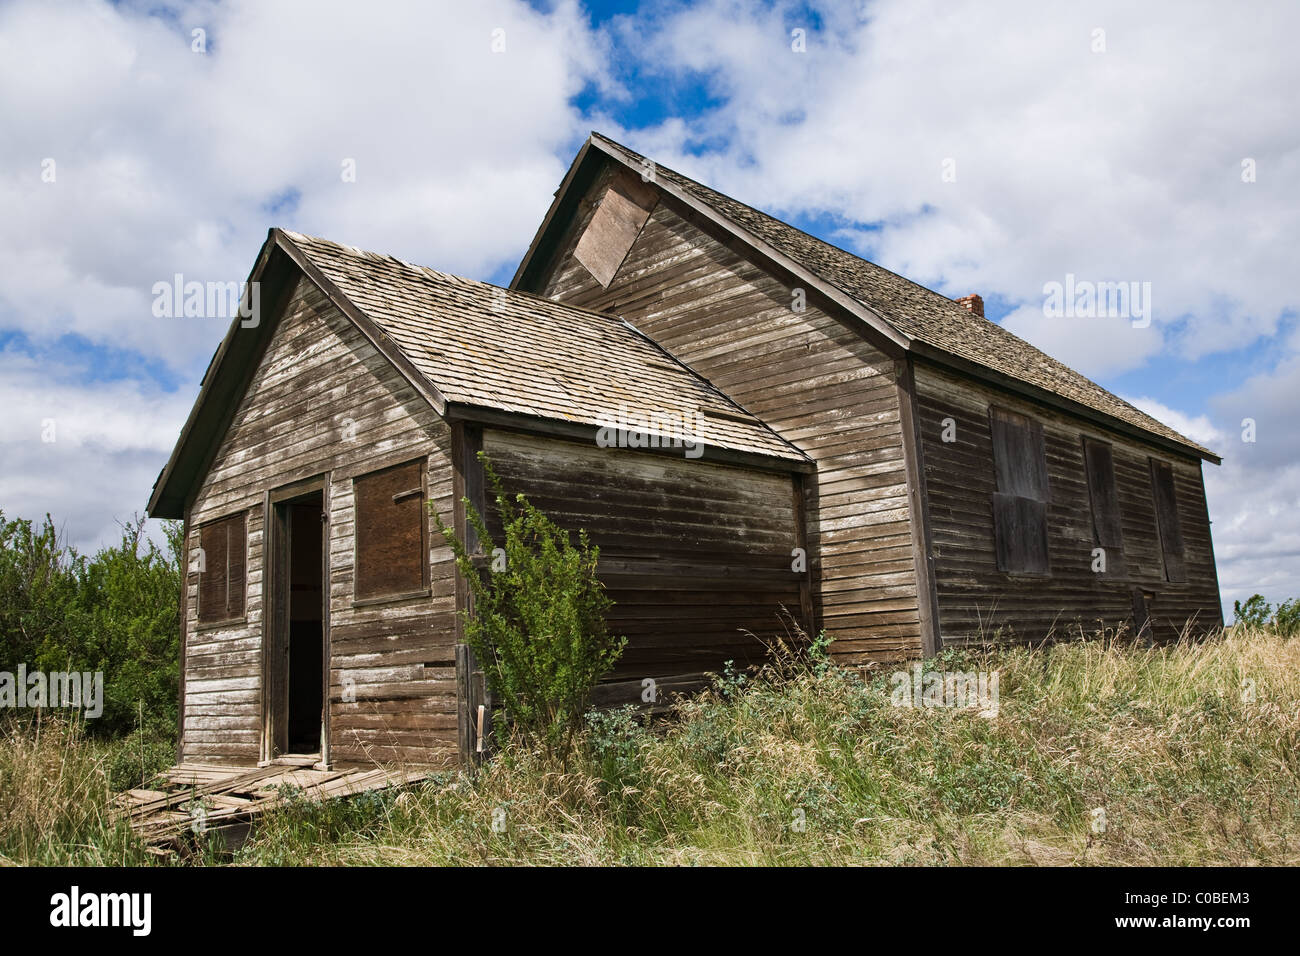 An abandoned one-room school house on the Canadian prairies Stock Photo